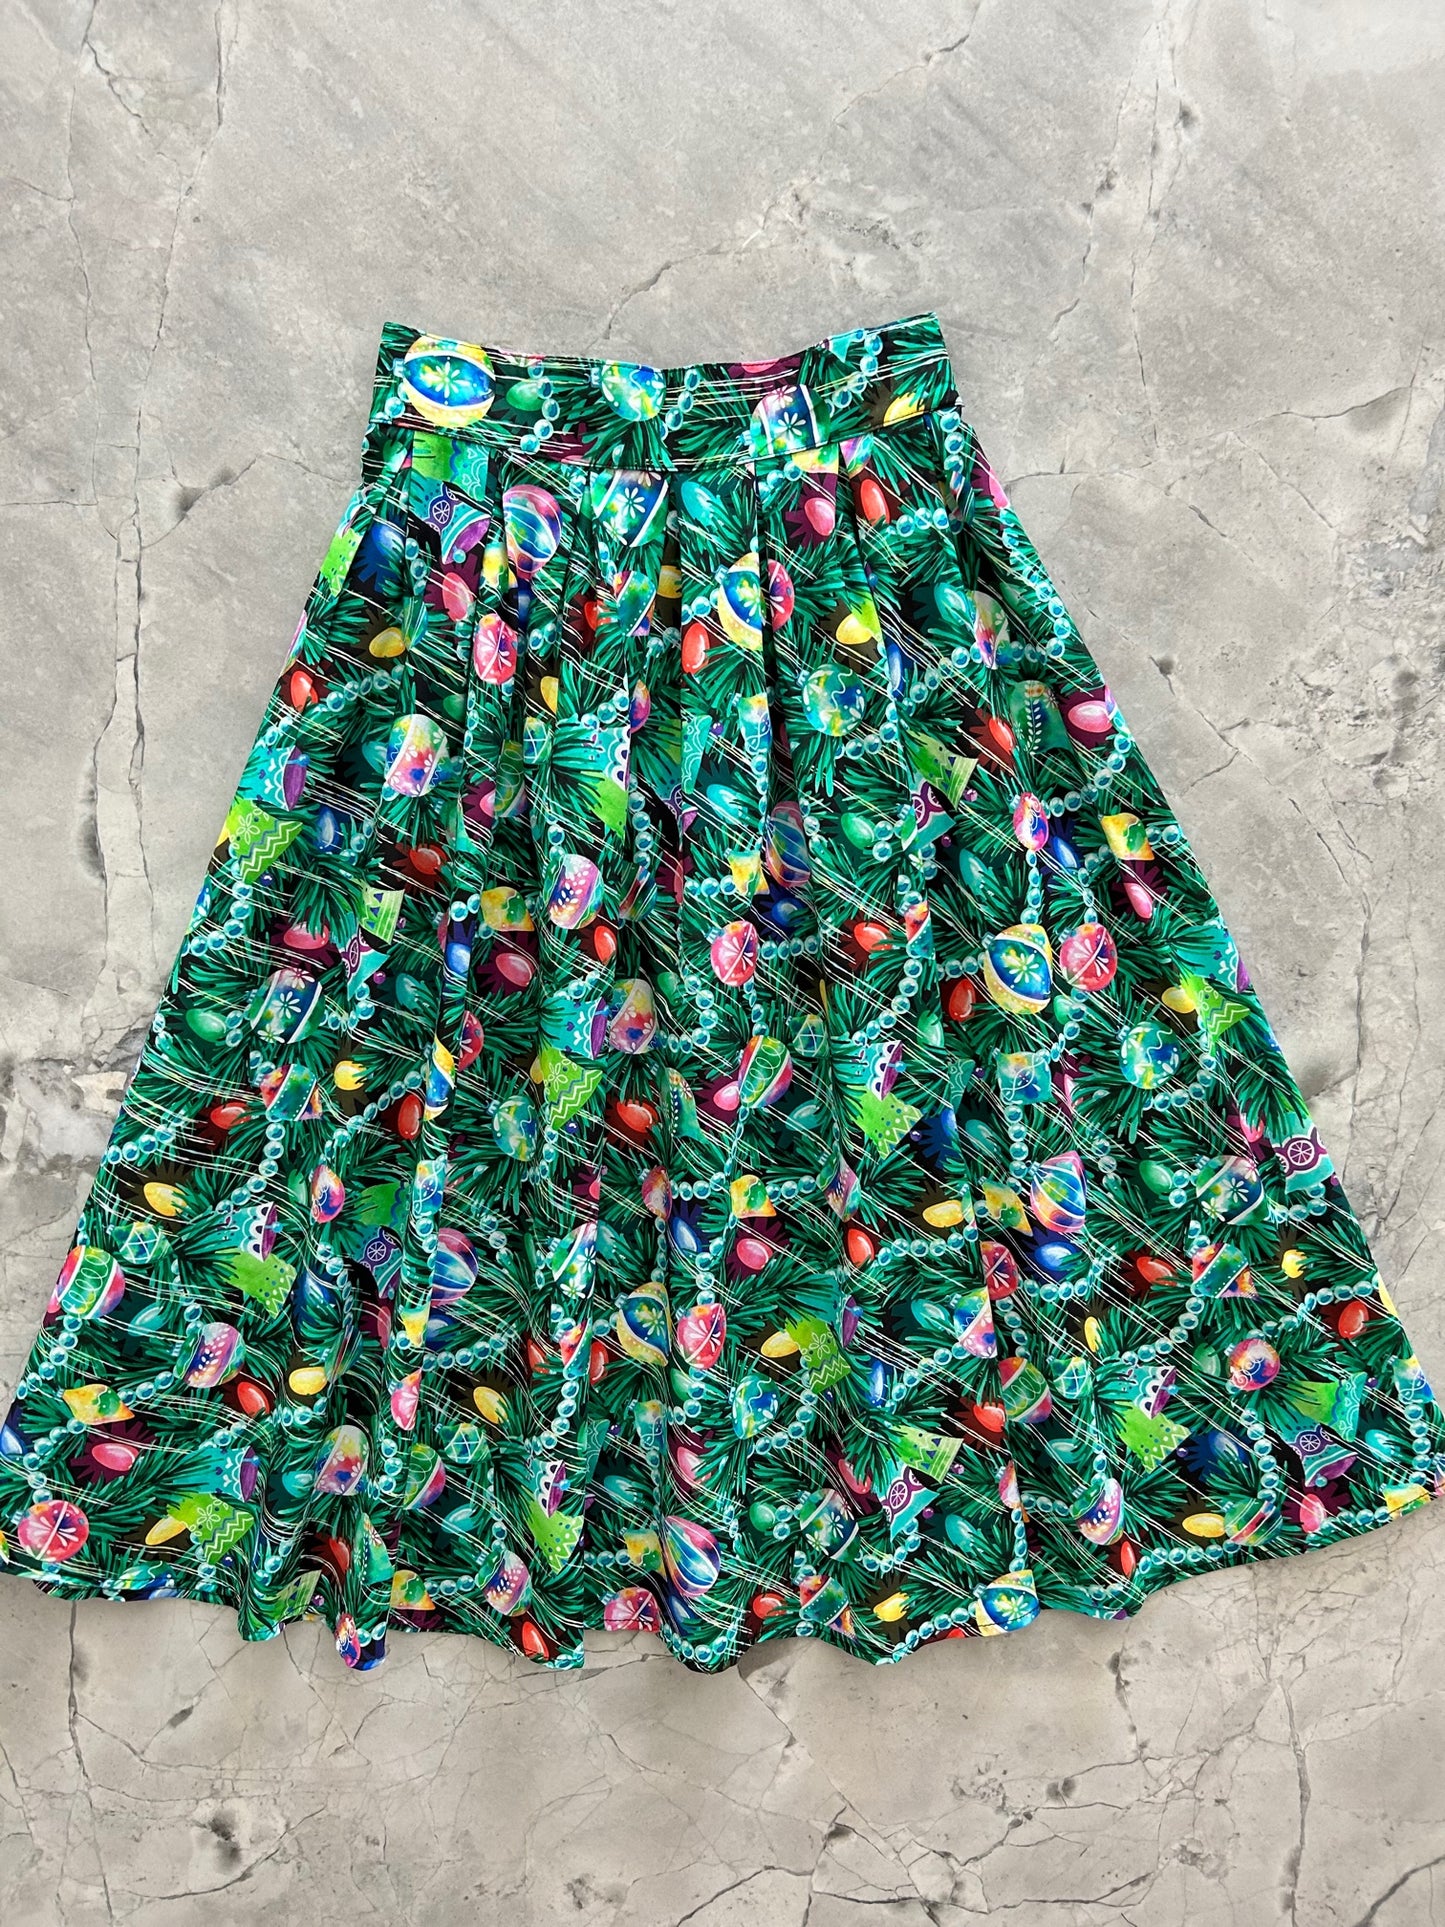 flat lay of a 50s style full swing skirt with ornament print